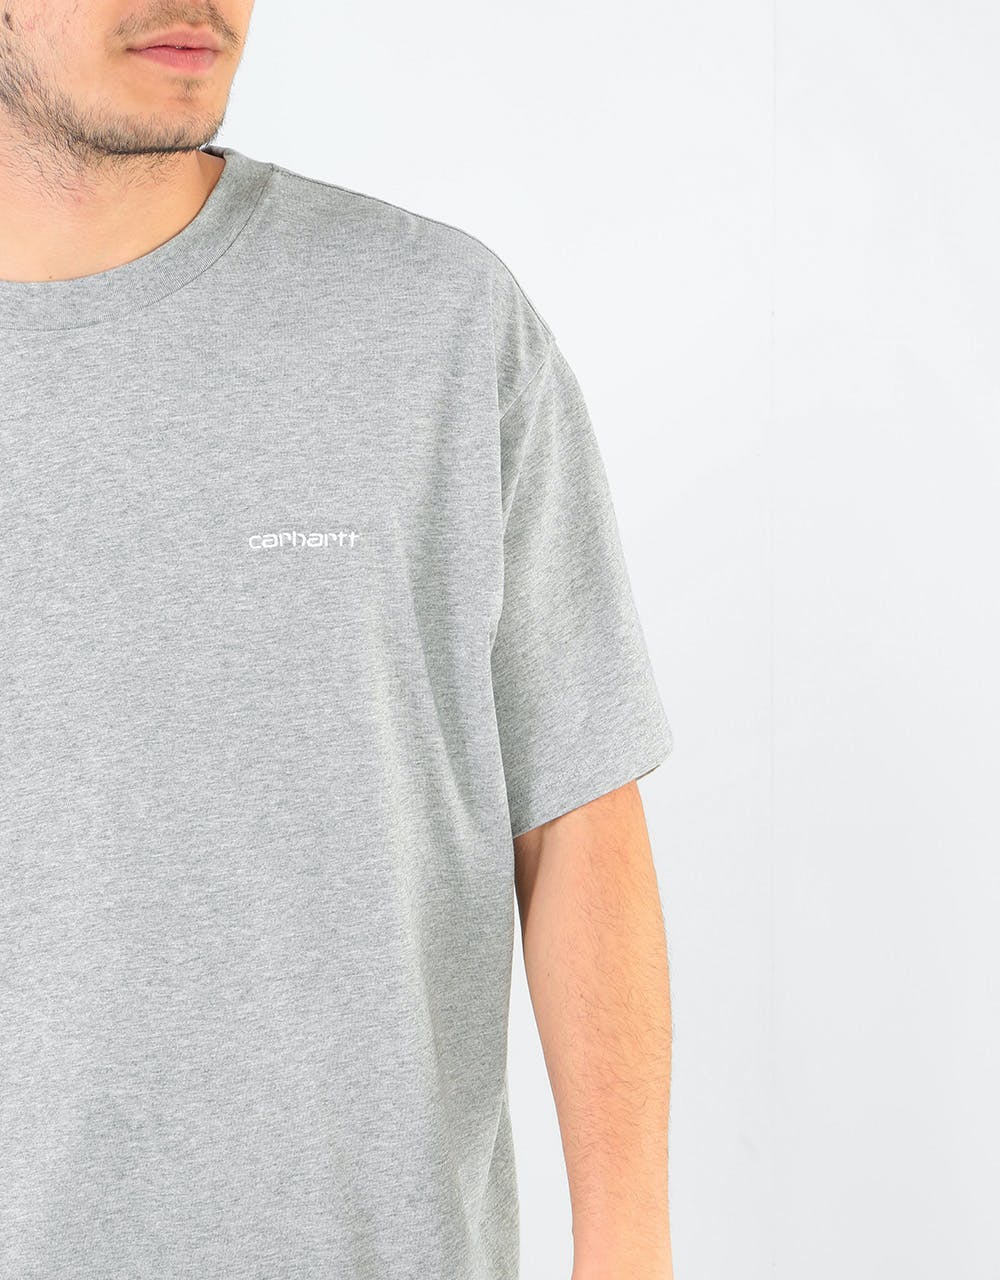 Carhartt WIP S/S Script Embroidery T-Shirt - Grey Heather/White